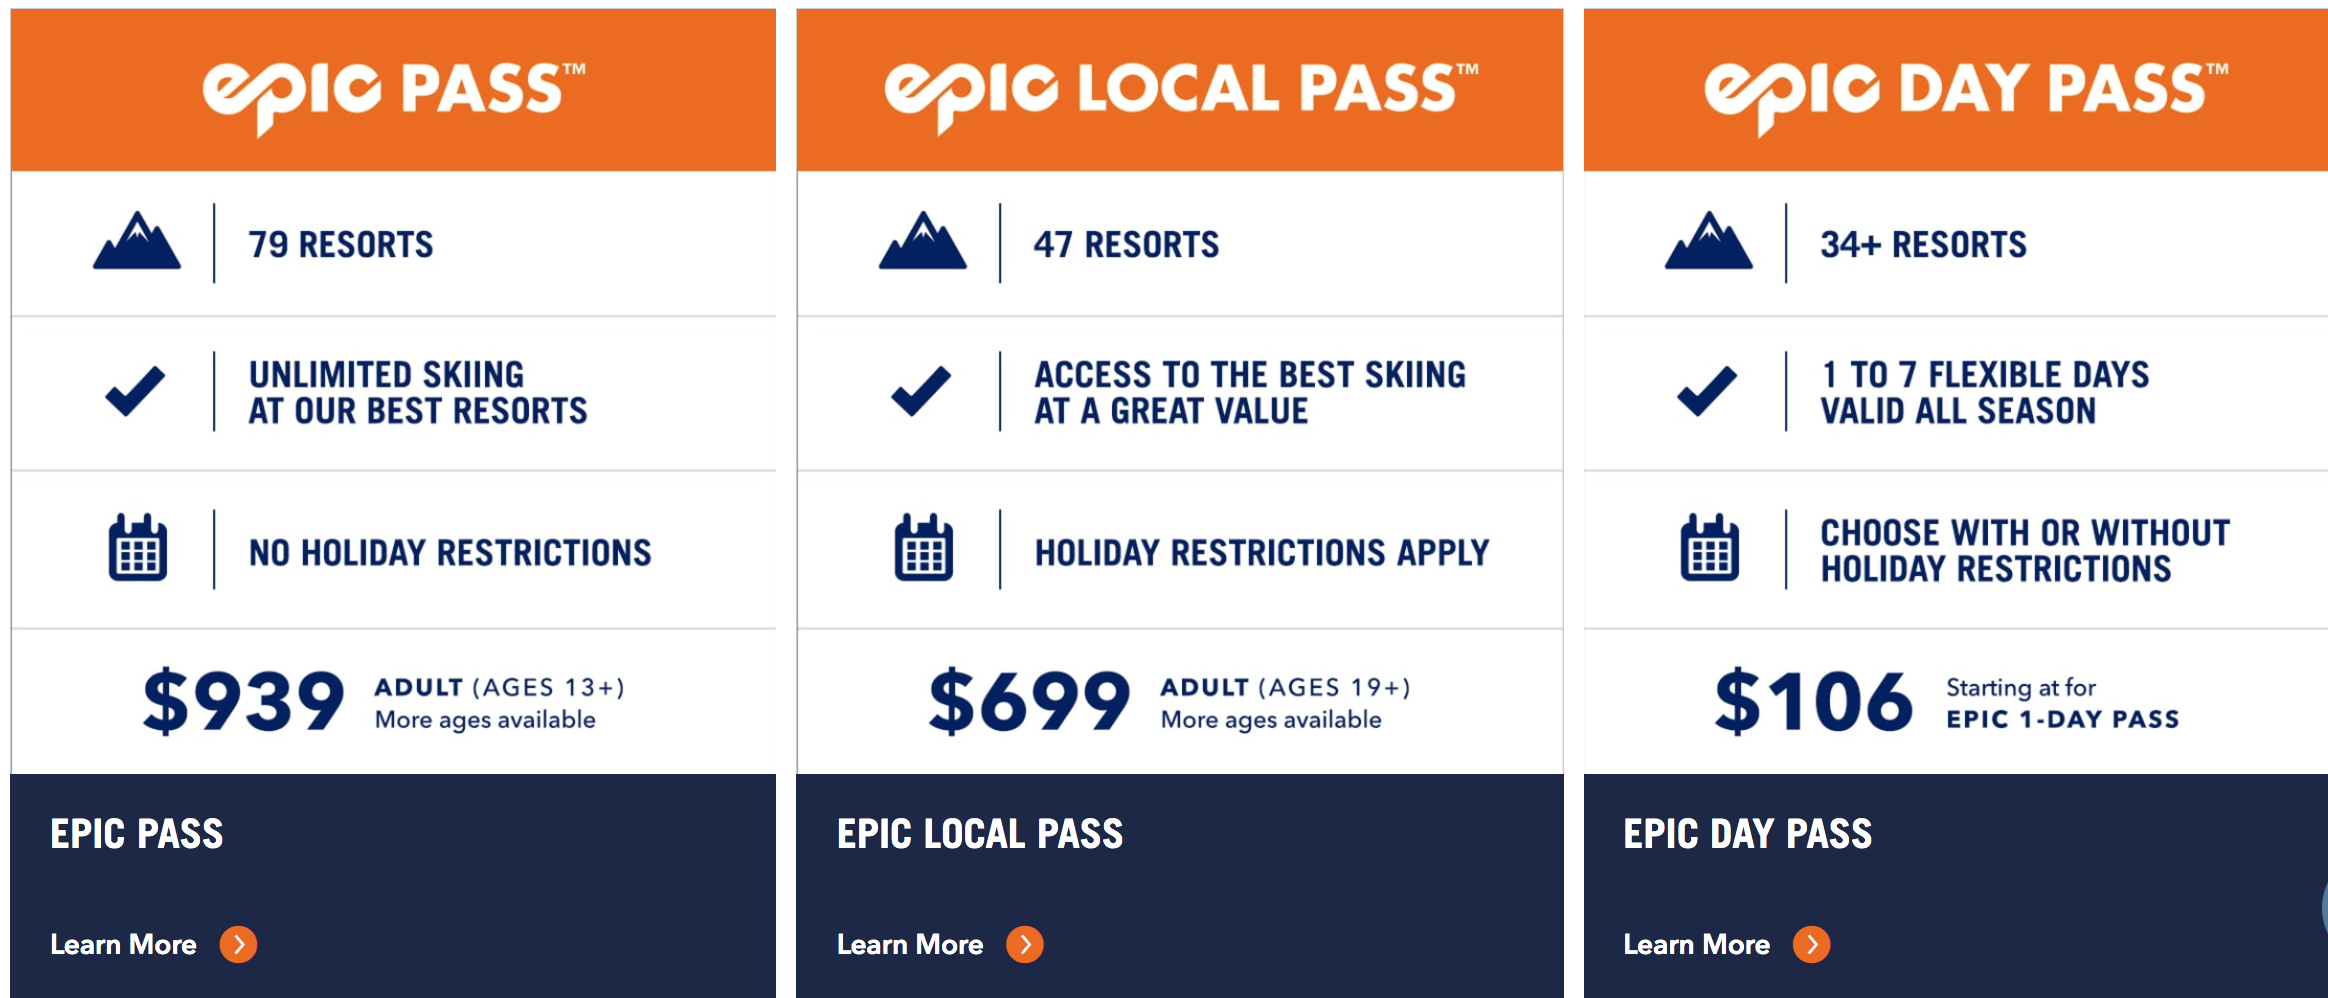 epic local pass holiday restrictions